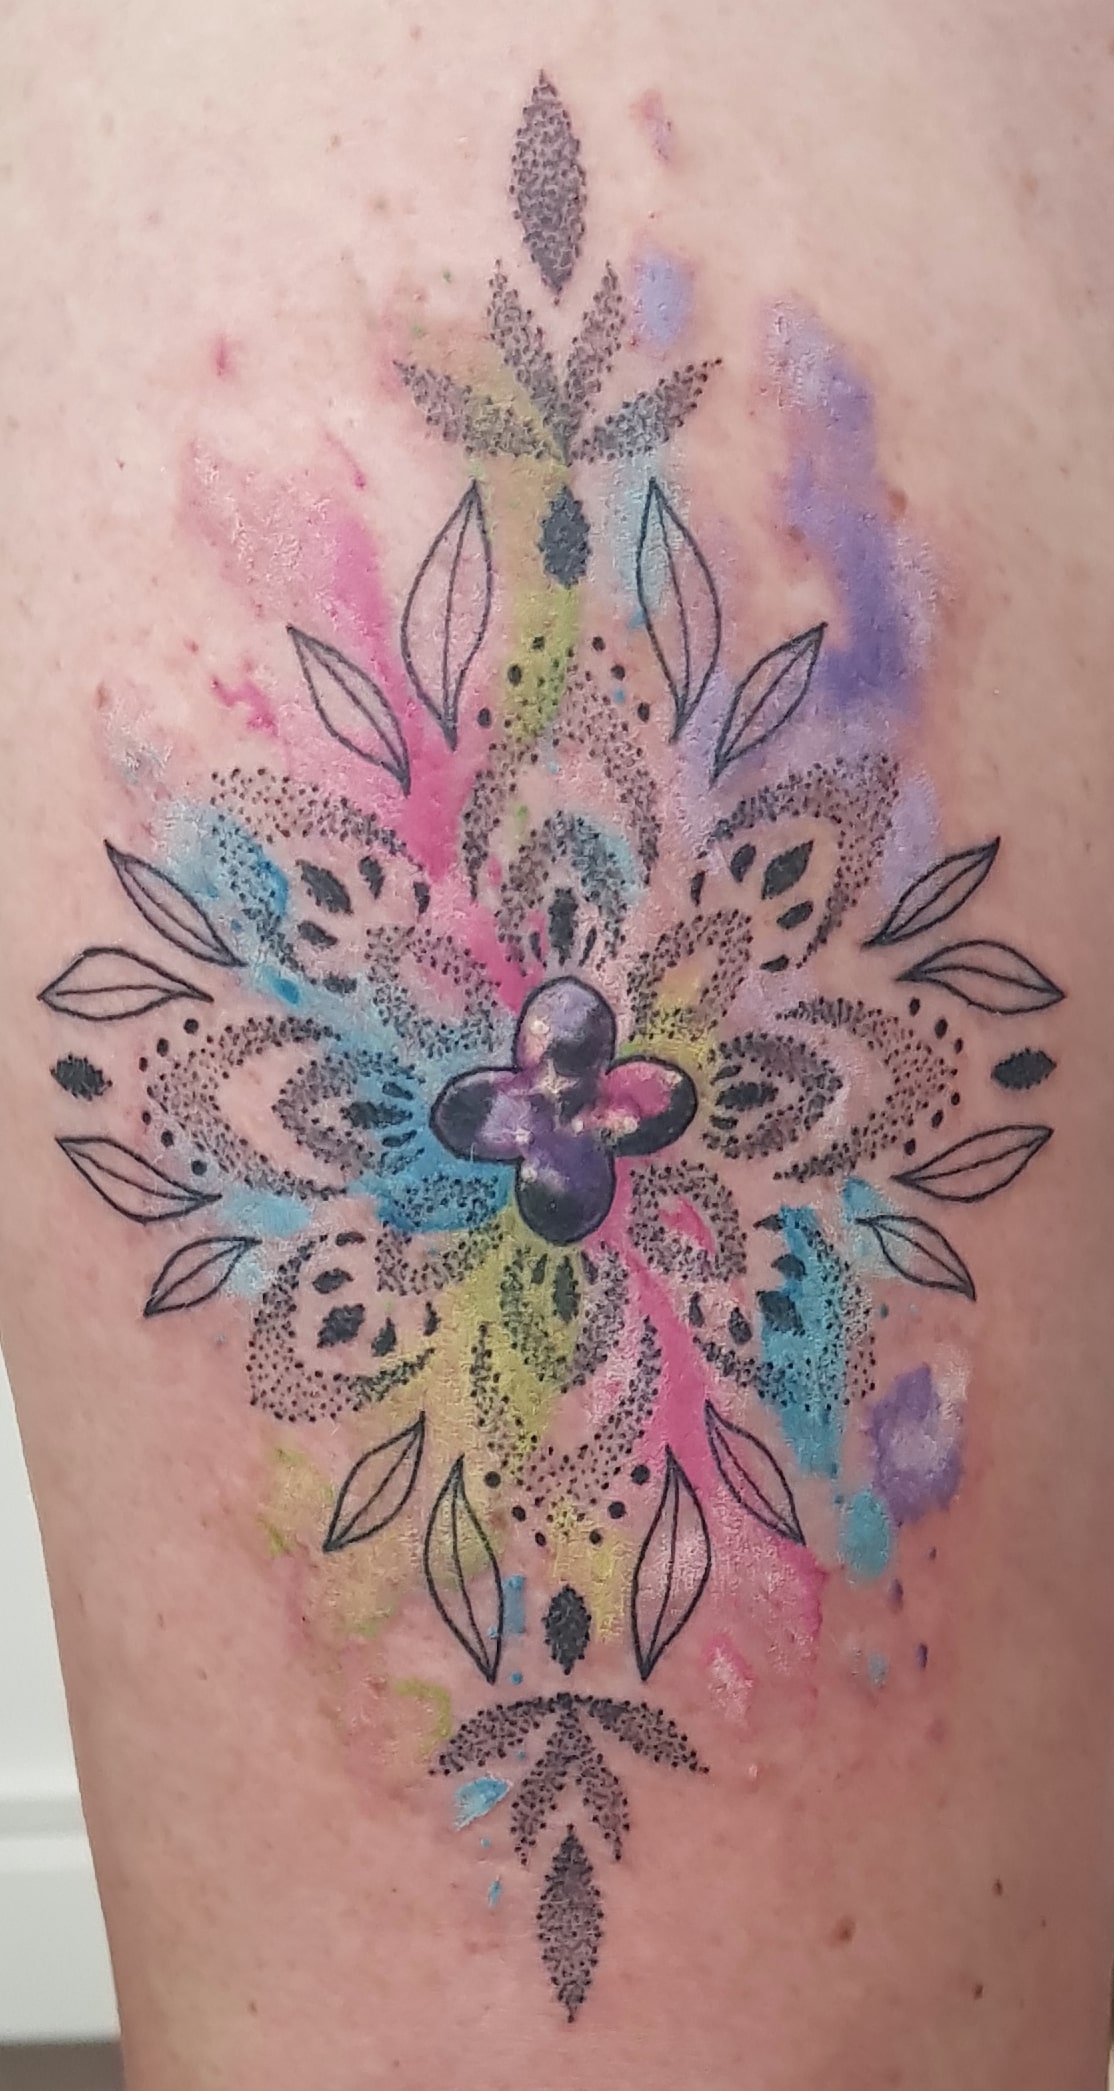 Ornamental watercolor style tattoo on the right